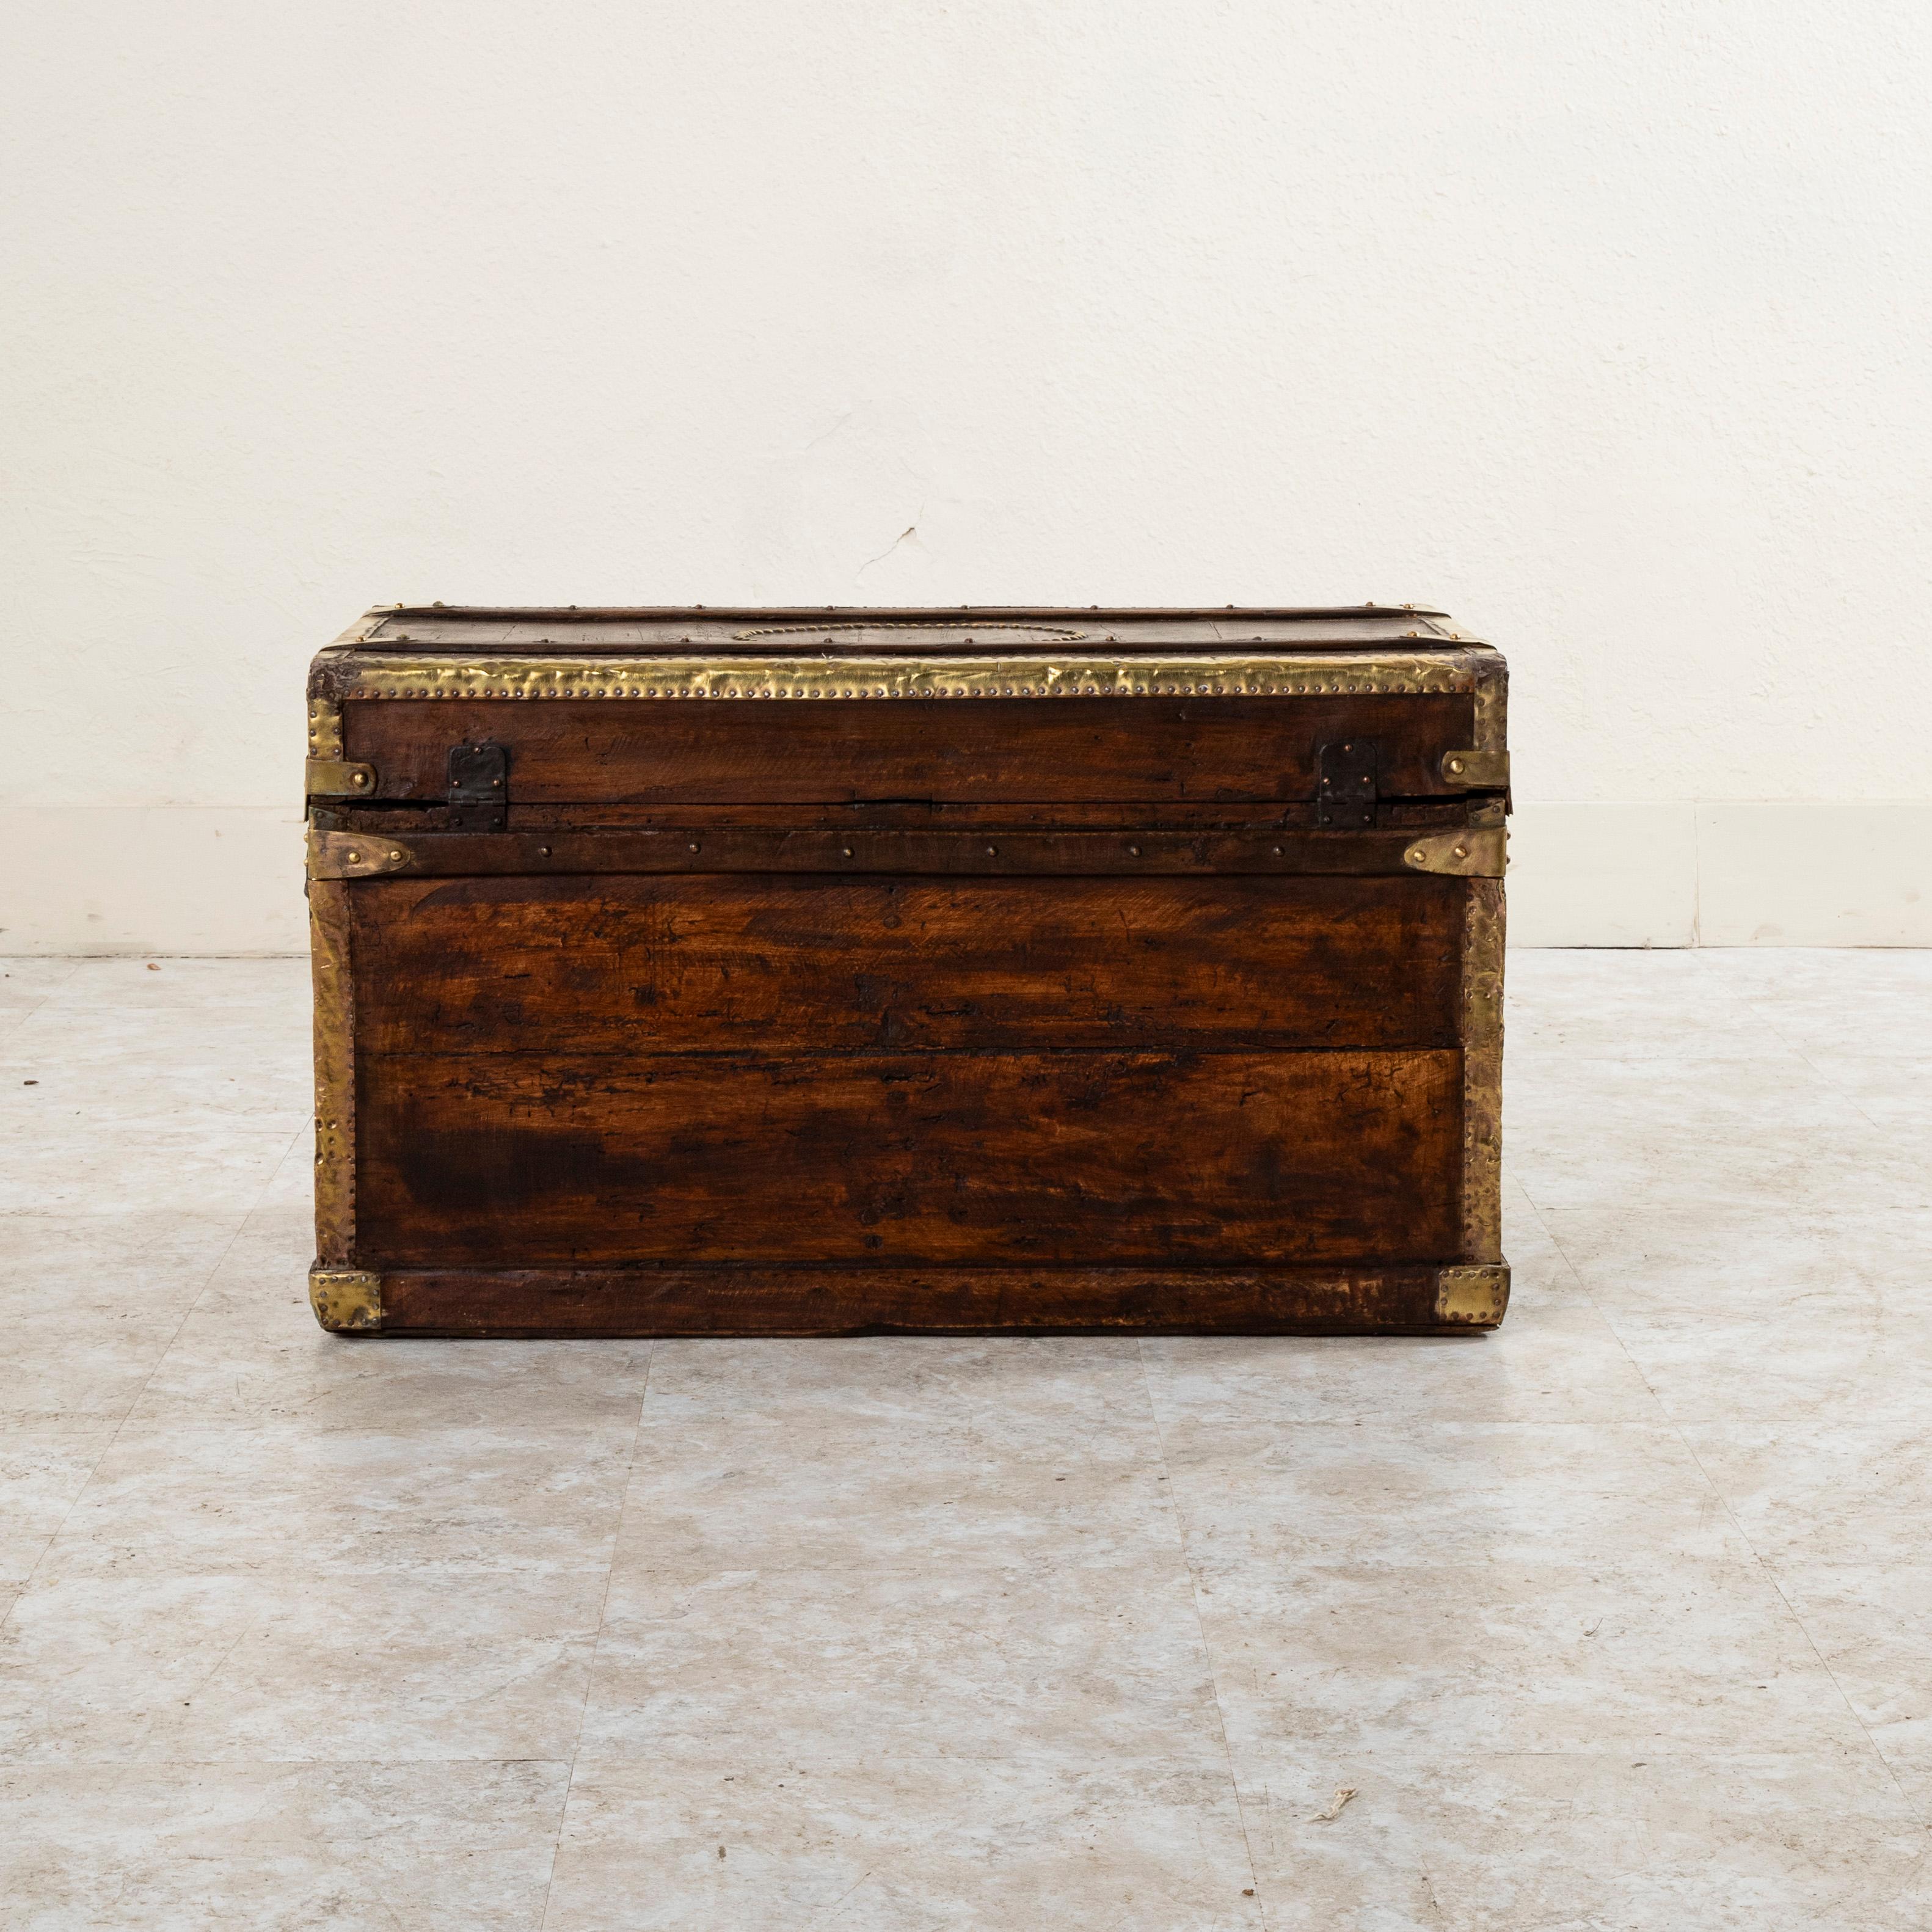 French Wooden Steam Trunk with Runners, Brass, Iron, Leather Details, circa 1880 For Sale 1